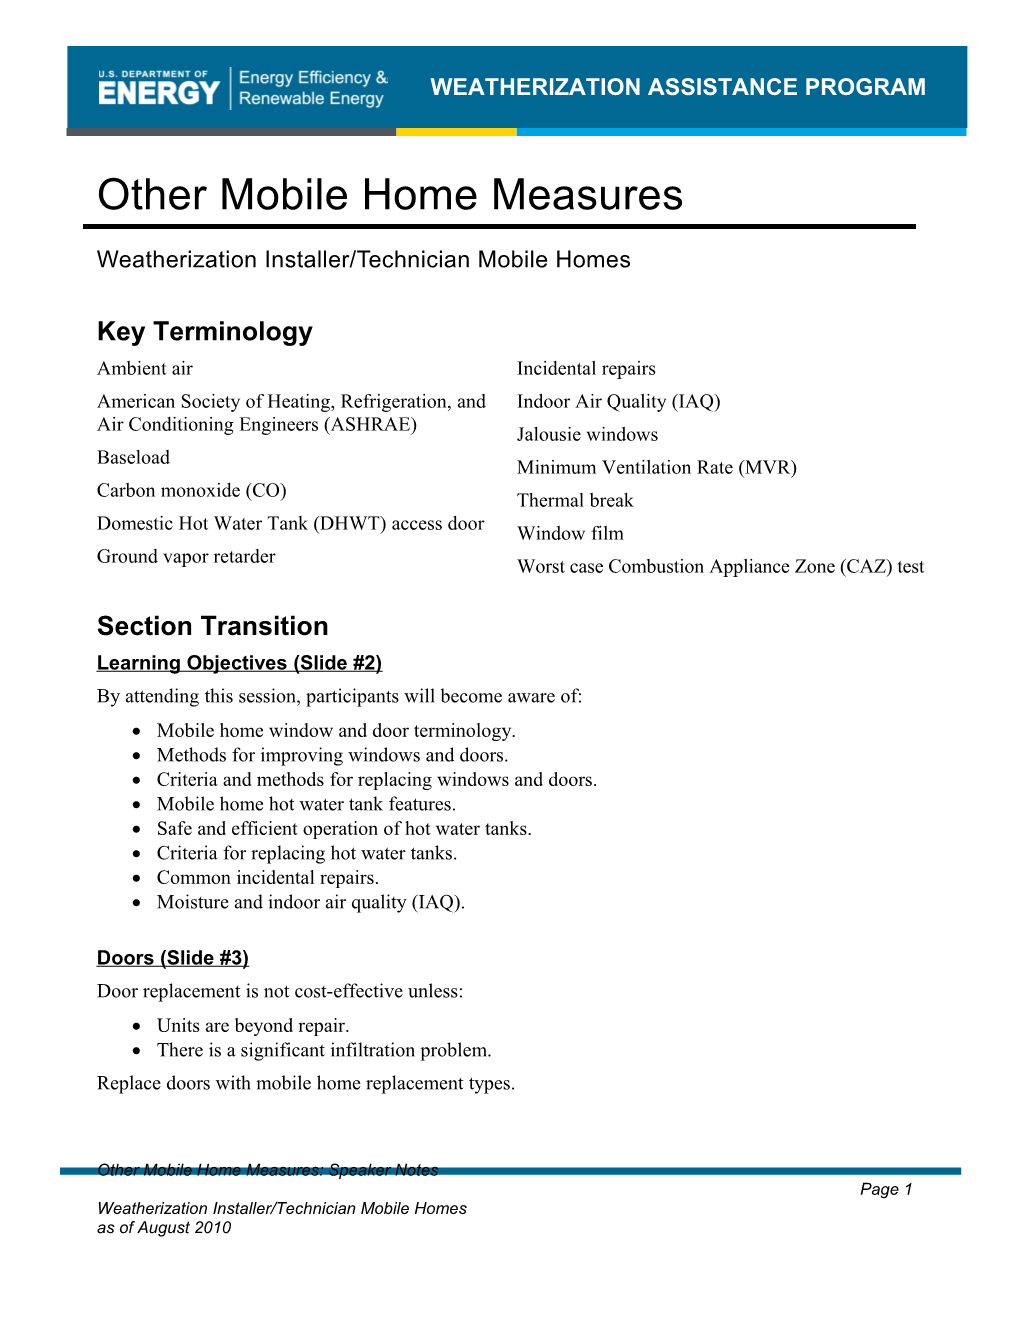 Other Mobile Home Measures